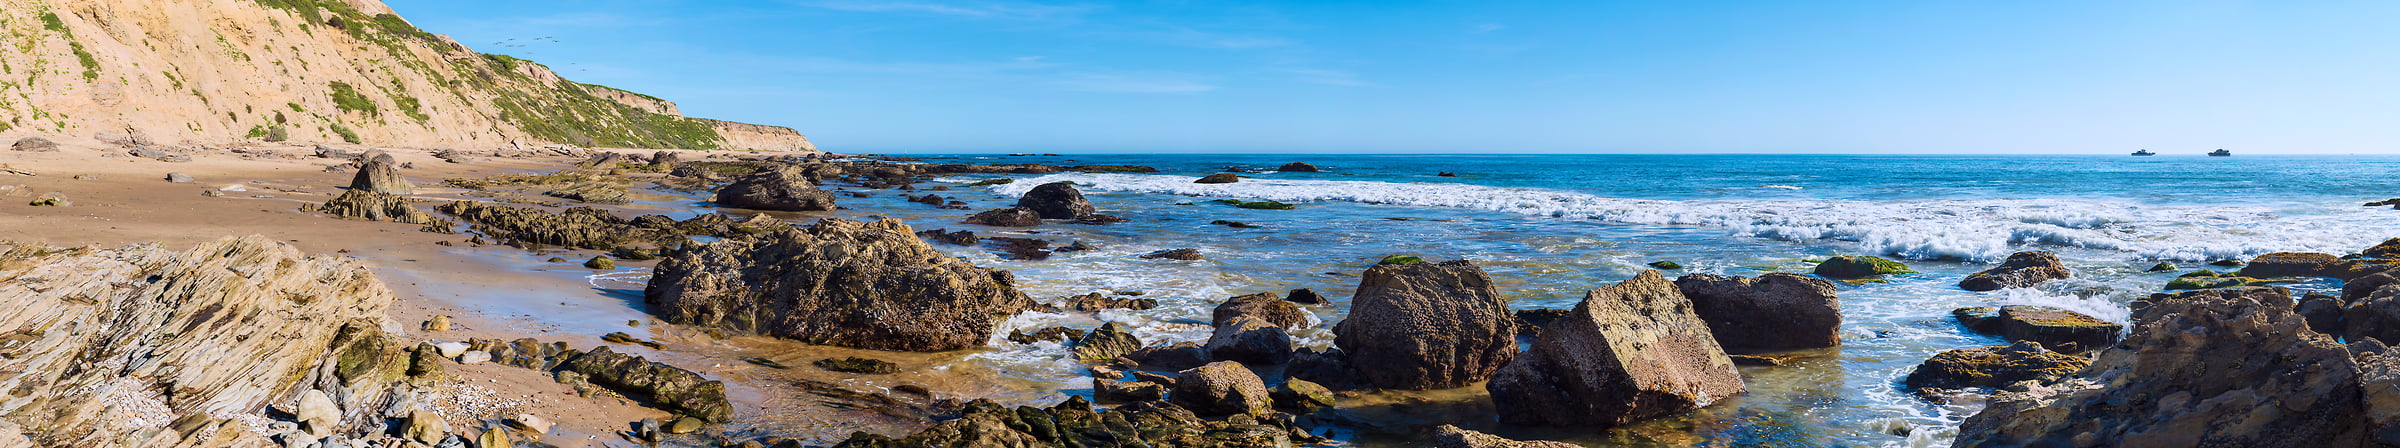 1,405 megapixels! A very high resolution, large-format VAST photo of a seascape with the beach, rocks, sand, and waves; panorama photograph created by Jim Tarpo in Newport Beach, California.